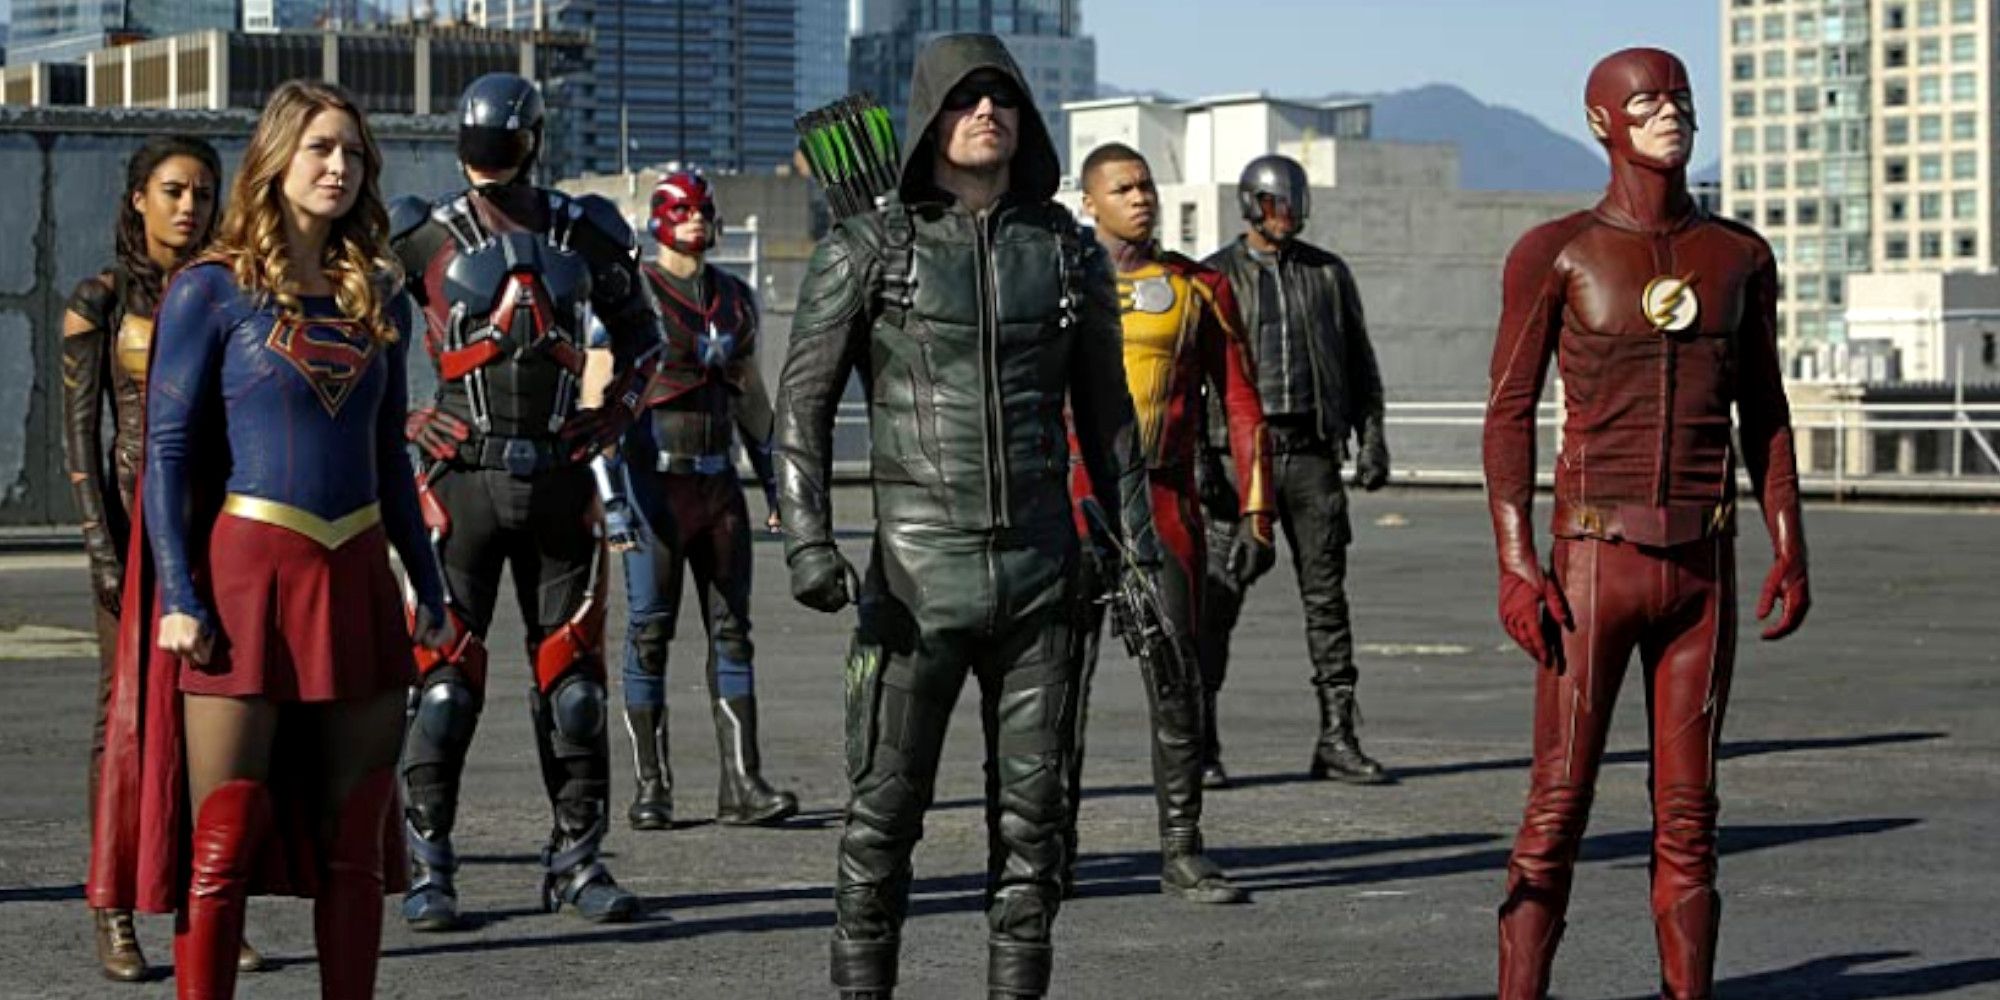 Legends of Tomorrow Invasion Season 3 Crossover The Flash, The Arrow, Supergirl